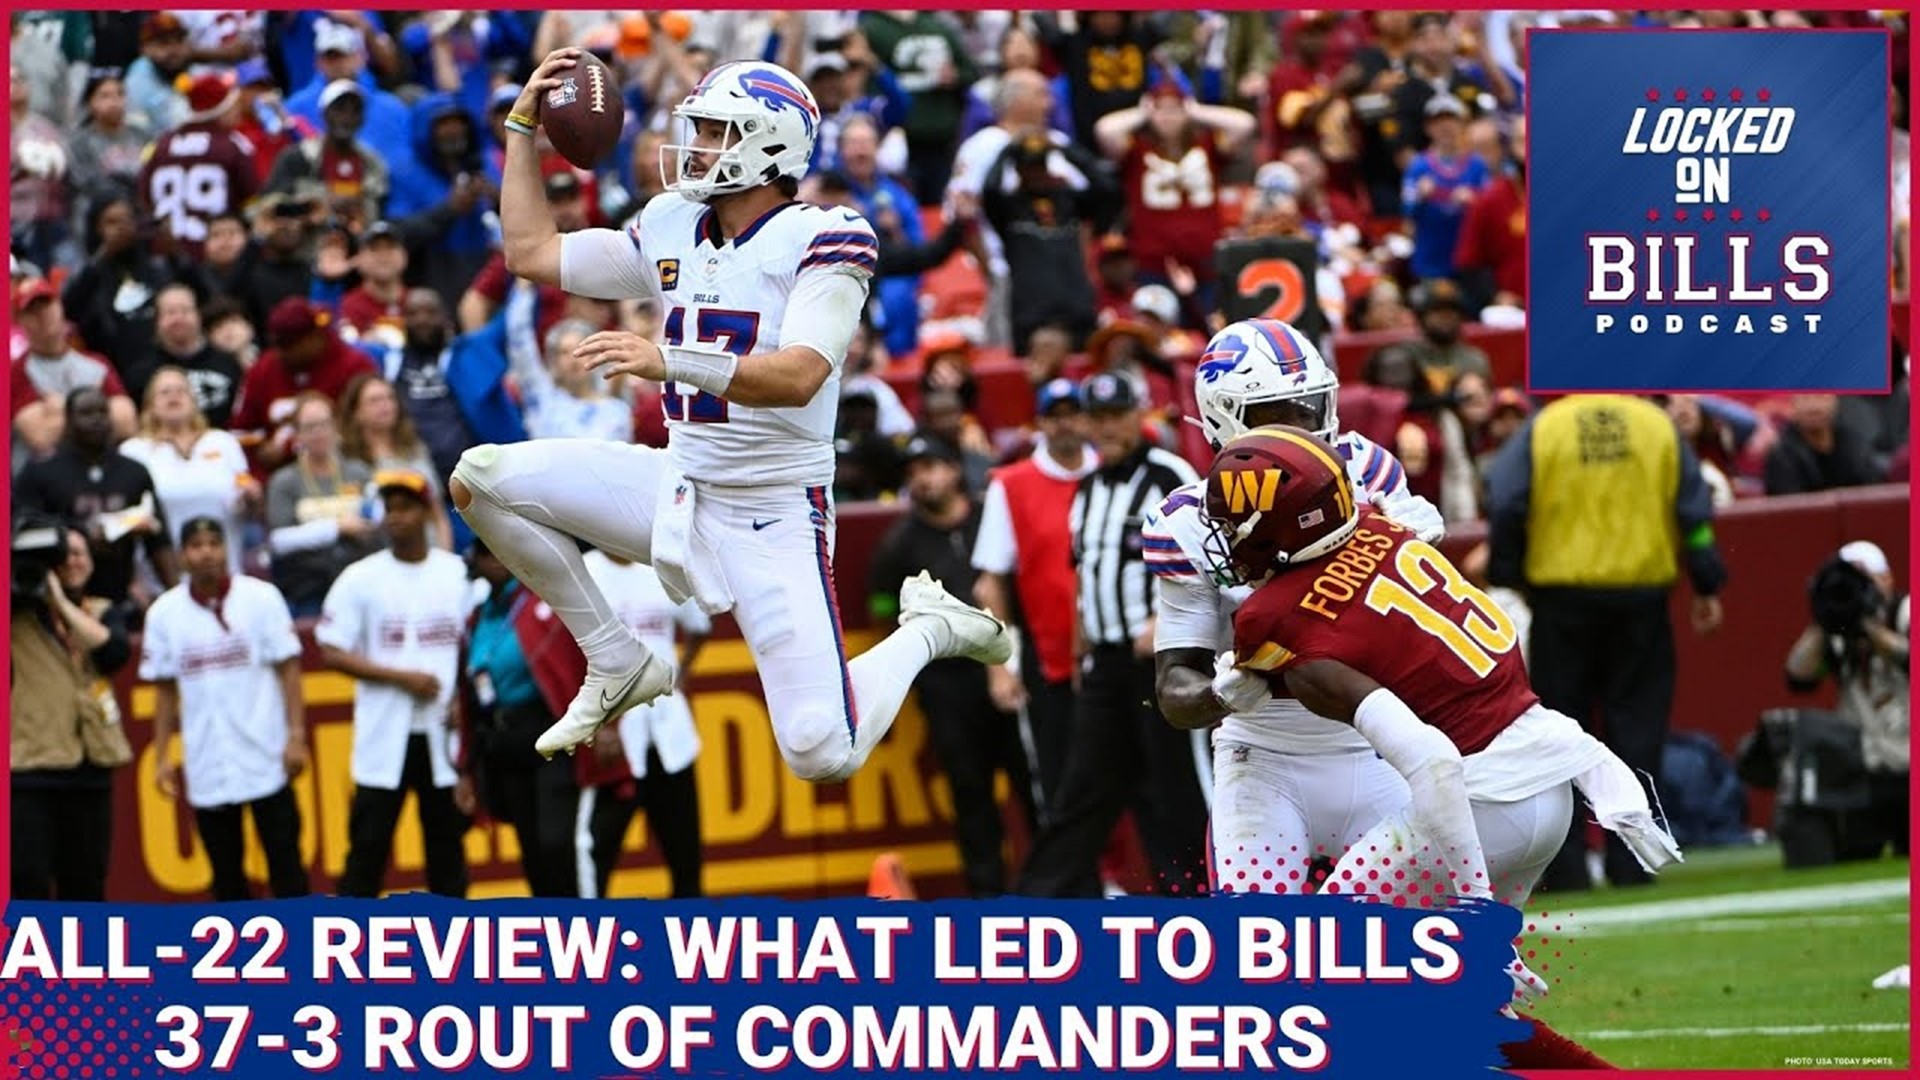 All-22 Review. Great protection for Josh Allen & elite Buffalo Bills defense in rout of Commanders